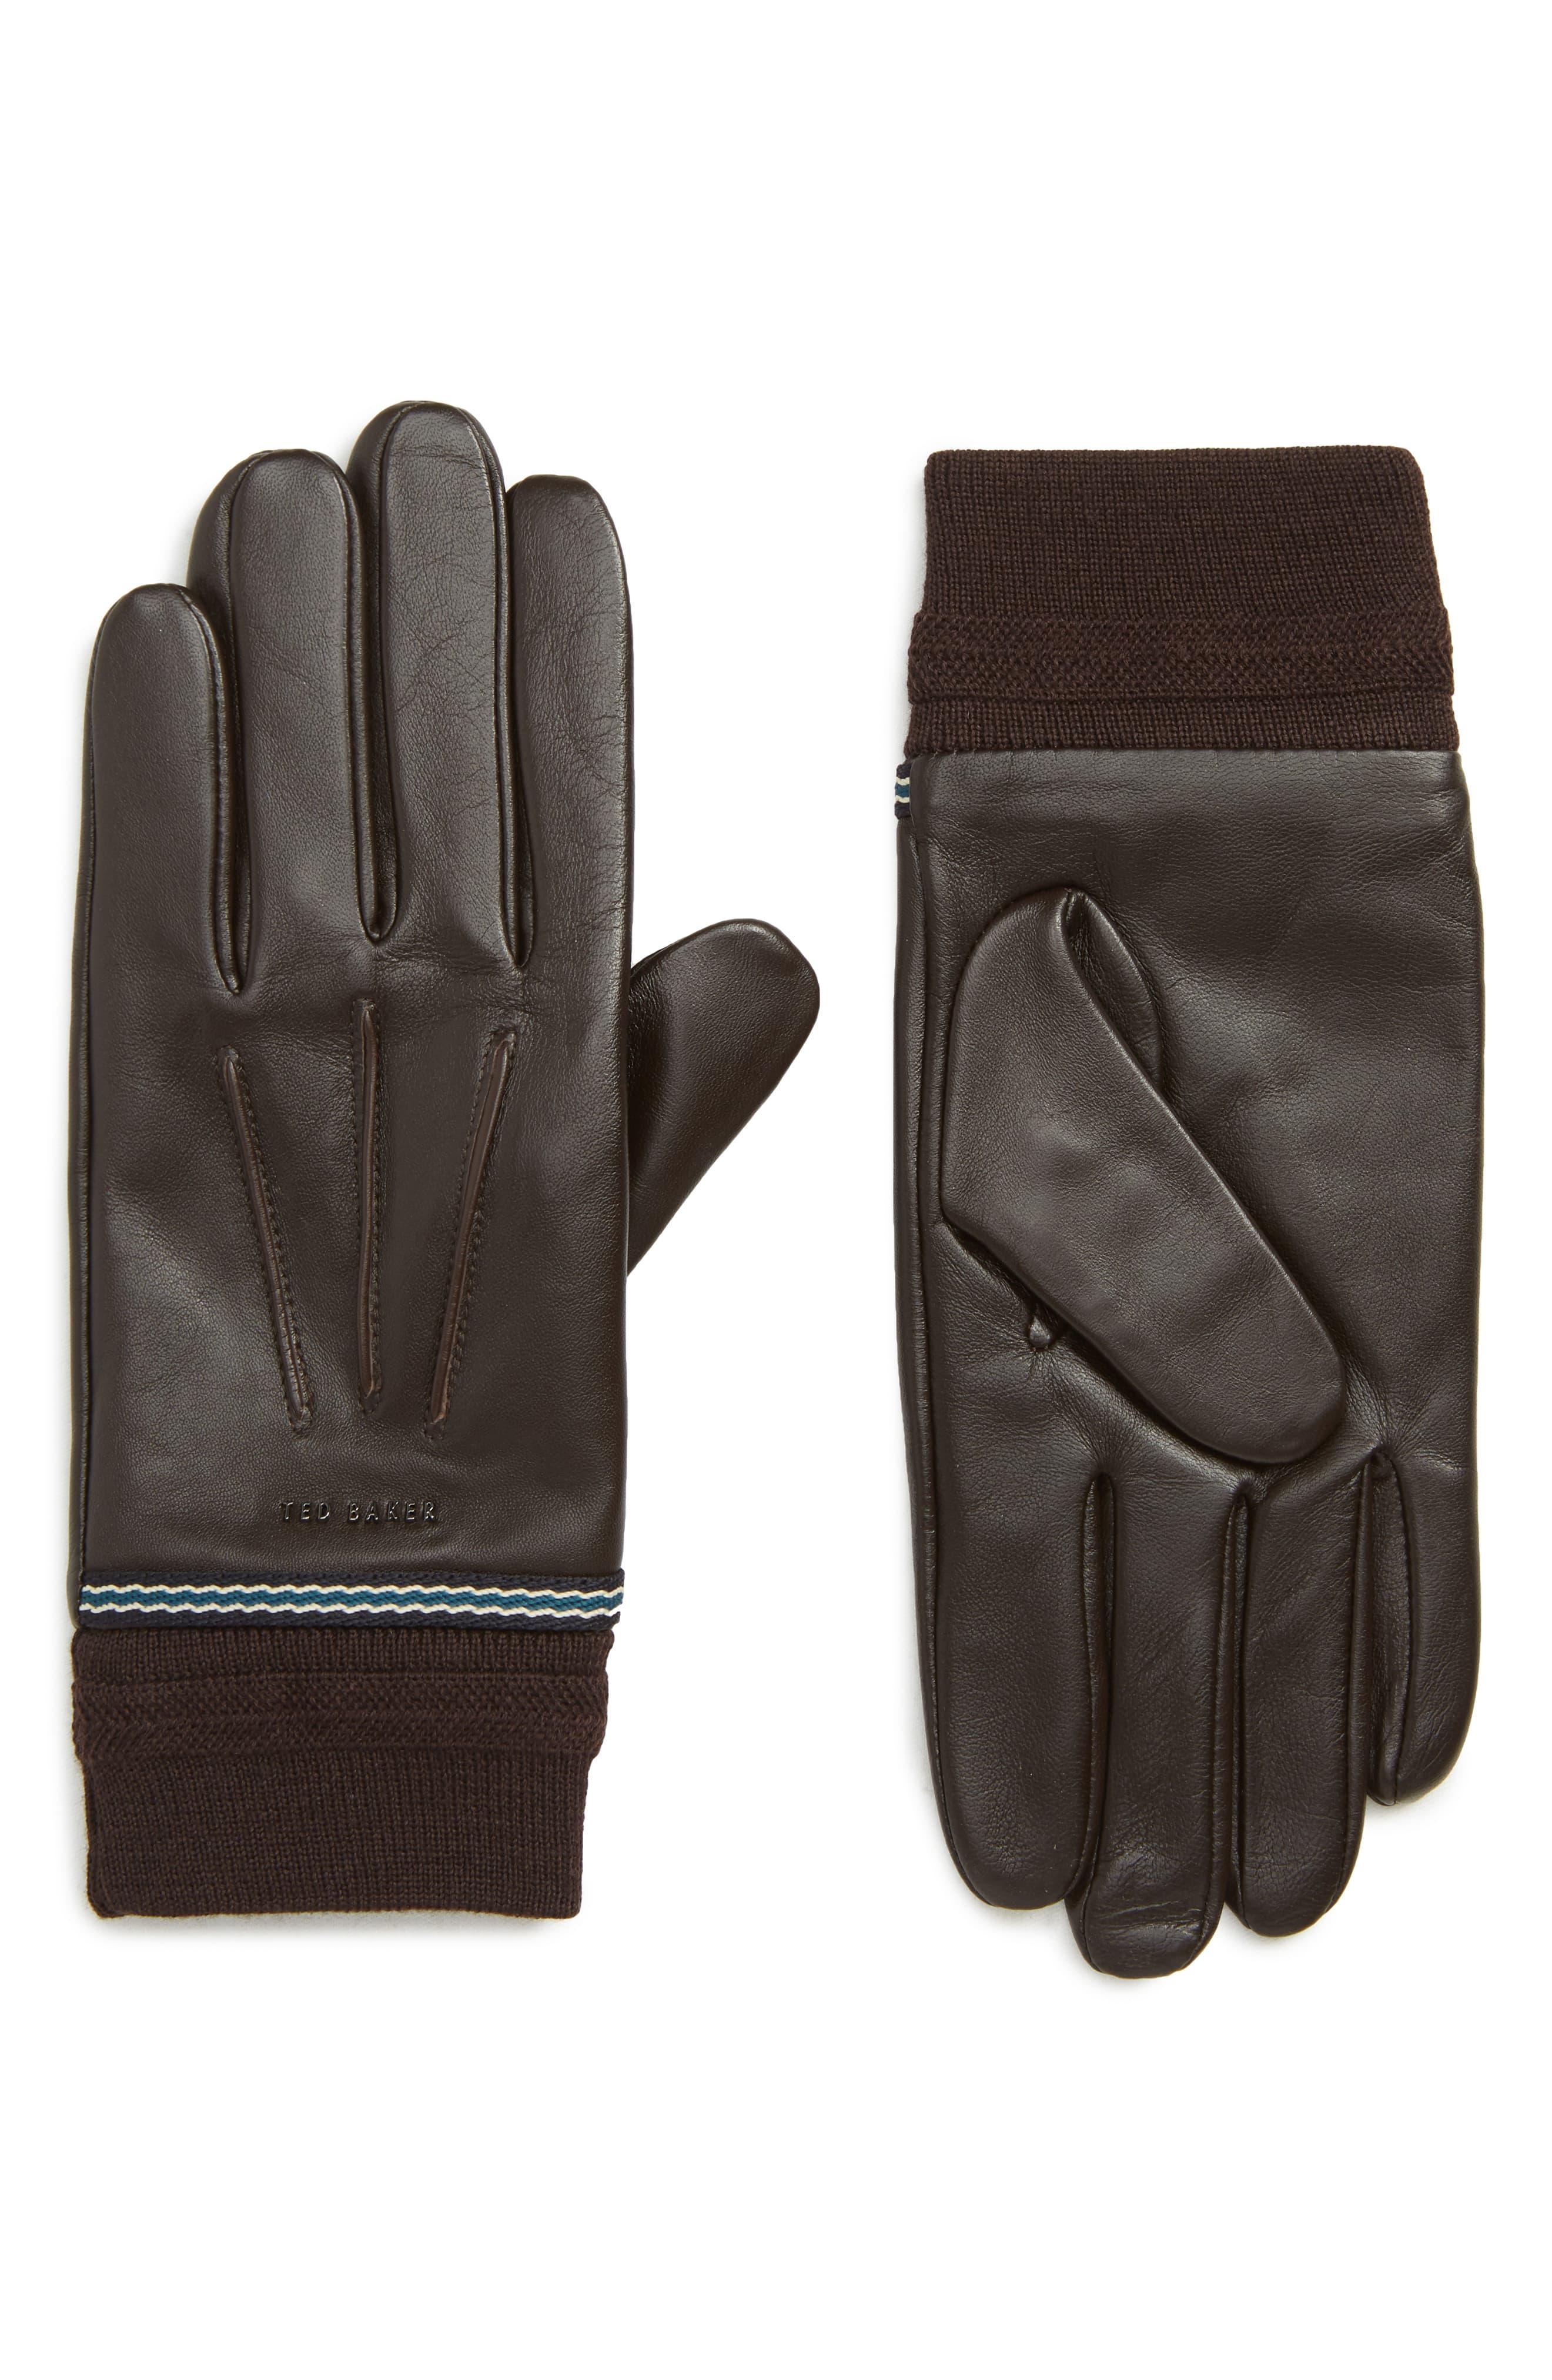 Ted Baker Cuffed Leather Touchscreen Gloves in Brown for Men - Lyst